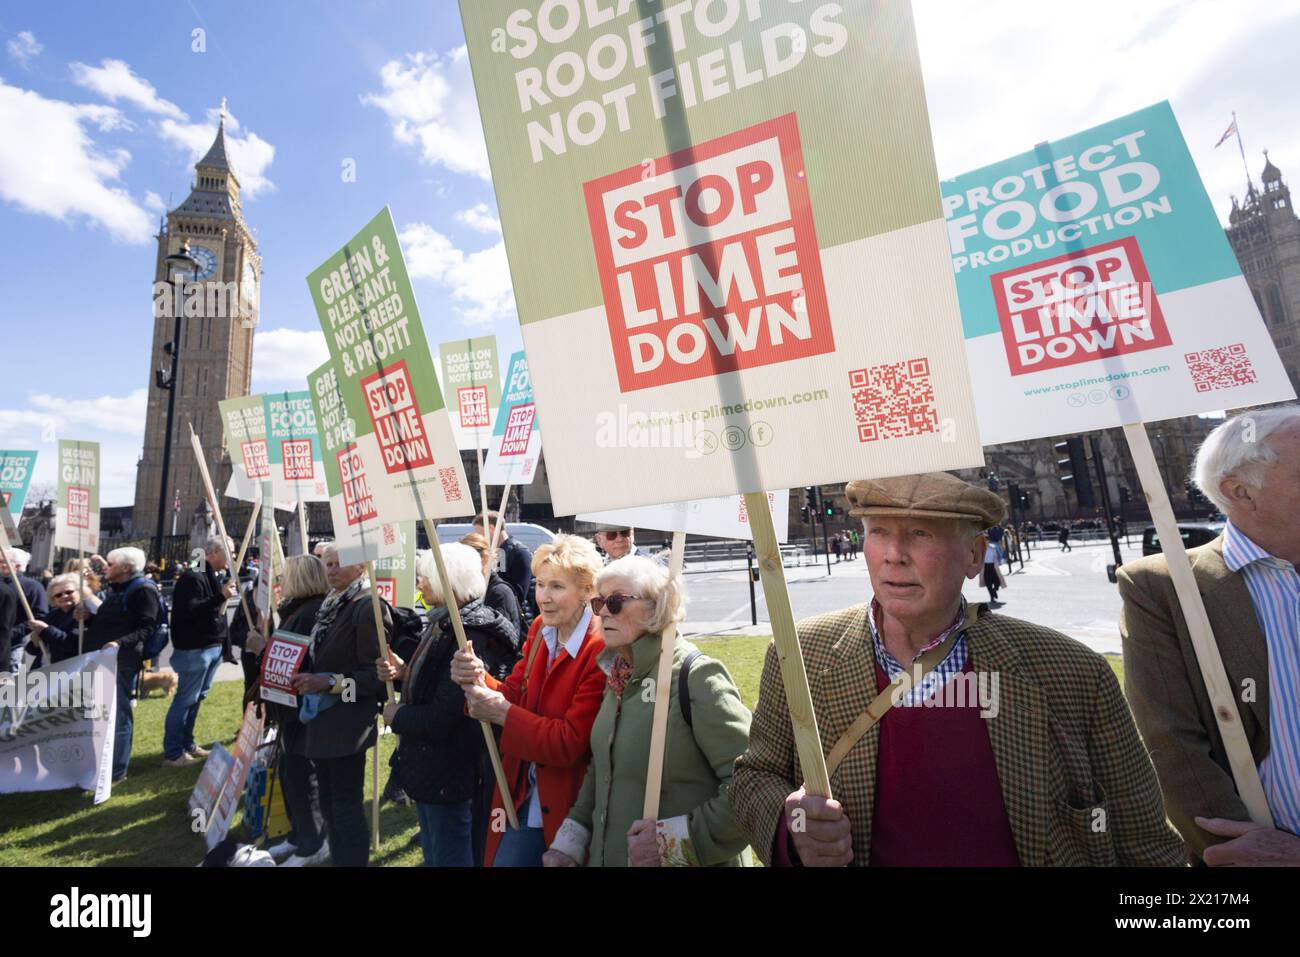 Campaigners staging a rally in Westminster in order to protect food production and nature from industrial-size solar farms, Parliament Square, London. Stock Photo